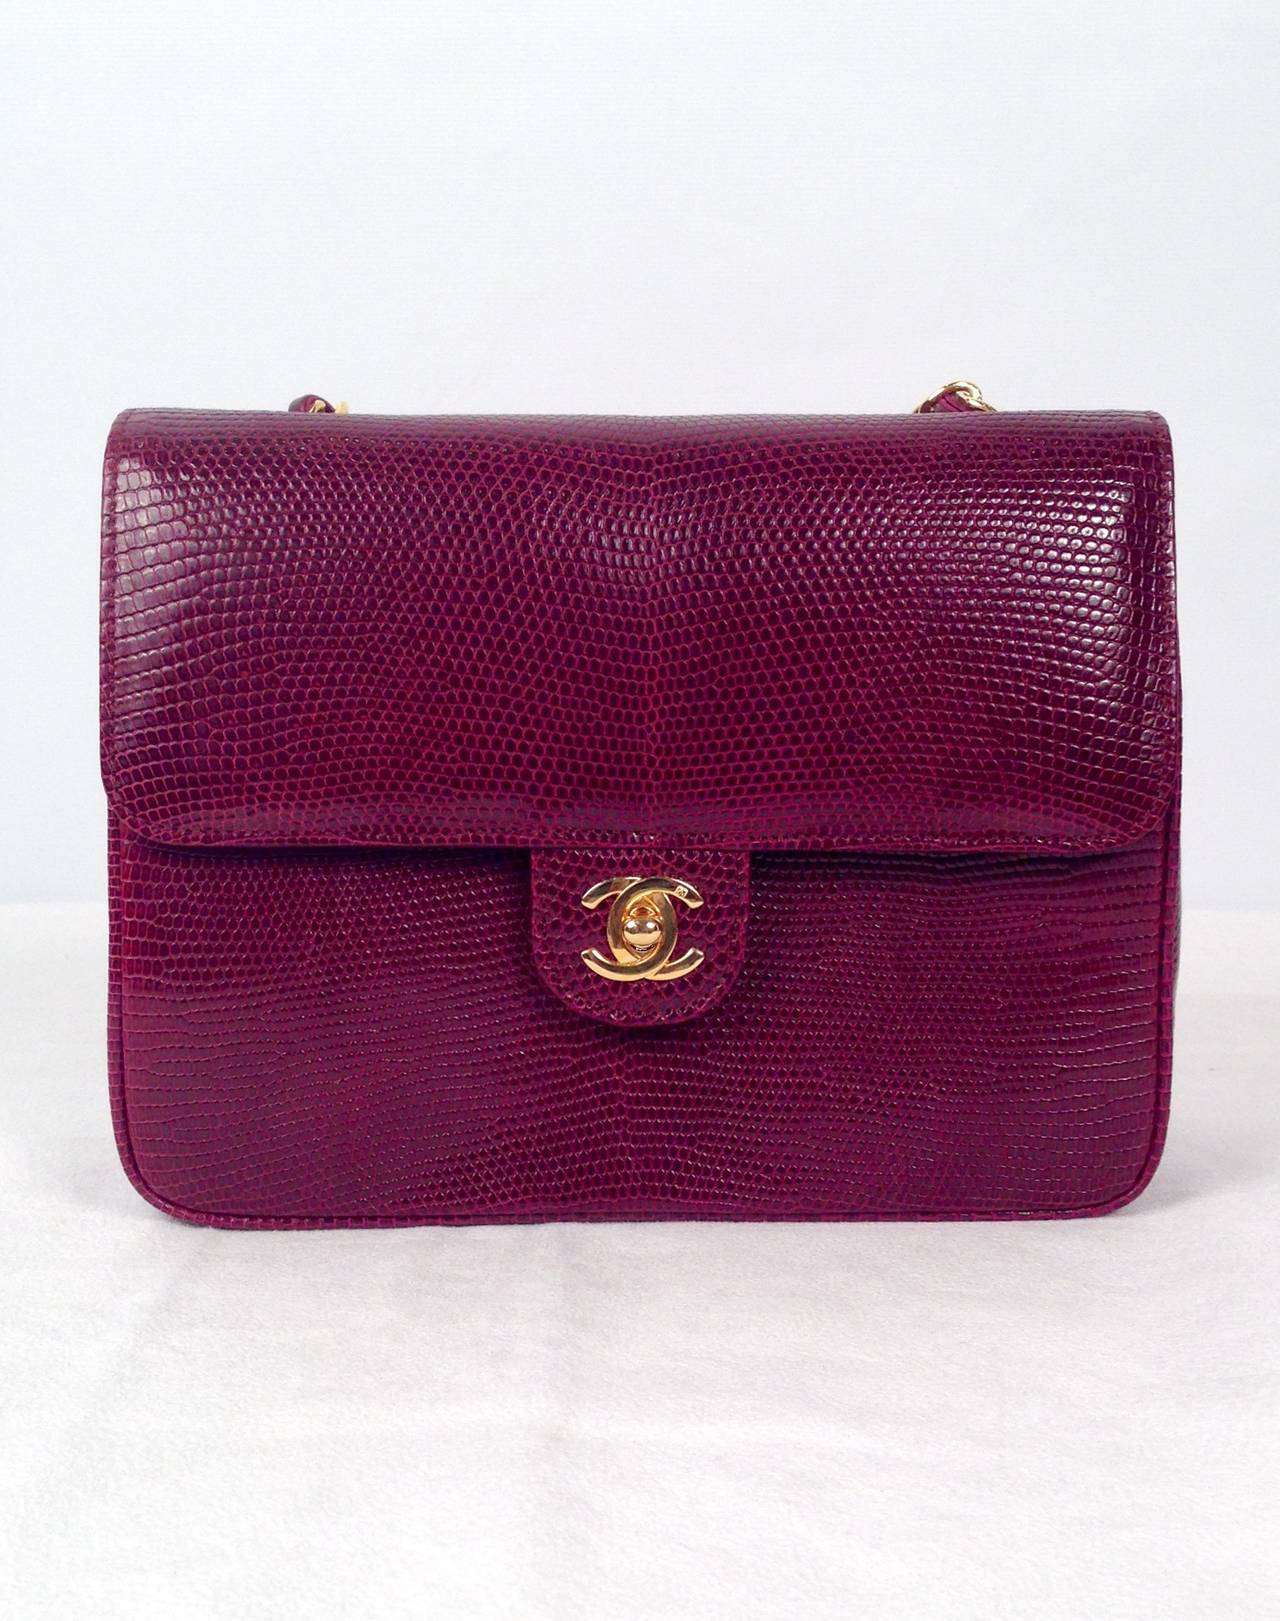 Vintage Chanel Burgundy Lizard Single Flap Bag In Excellent Condition For Sale In Palm Beach, FL